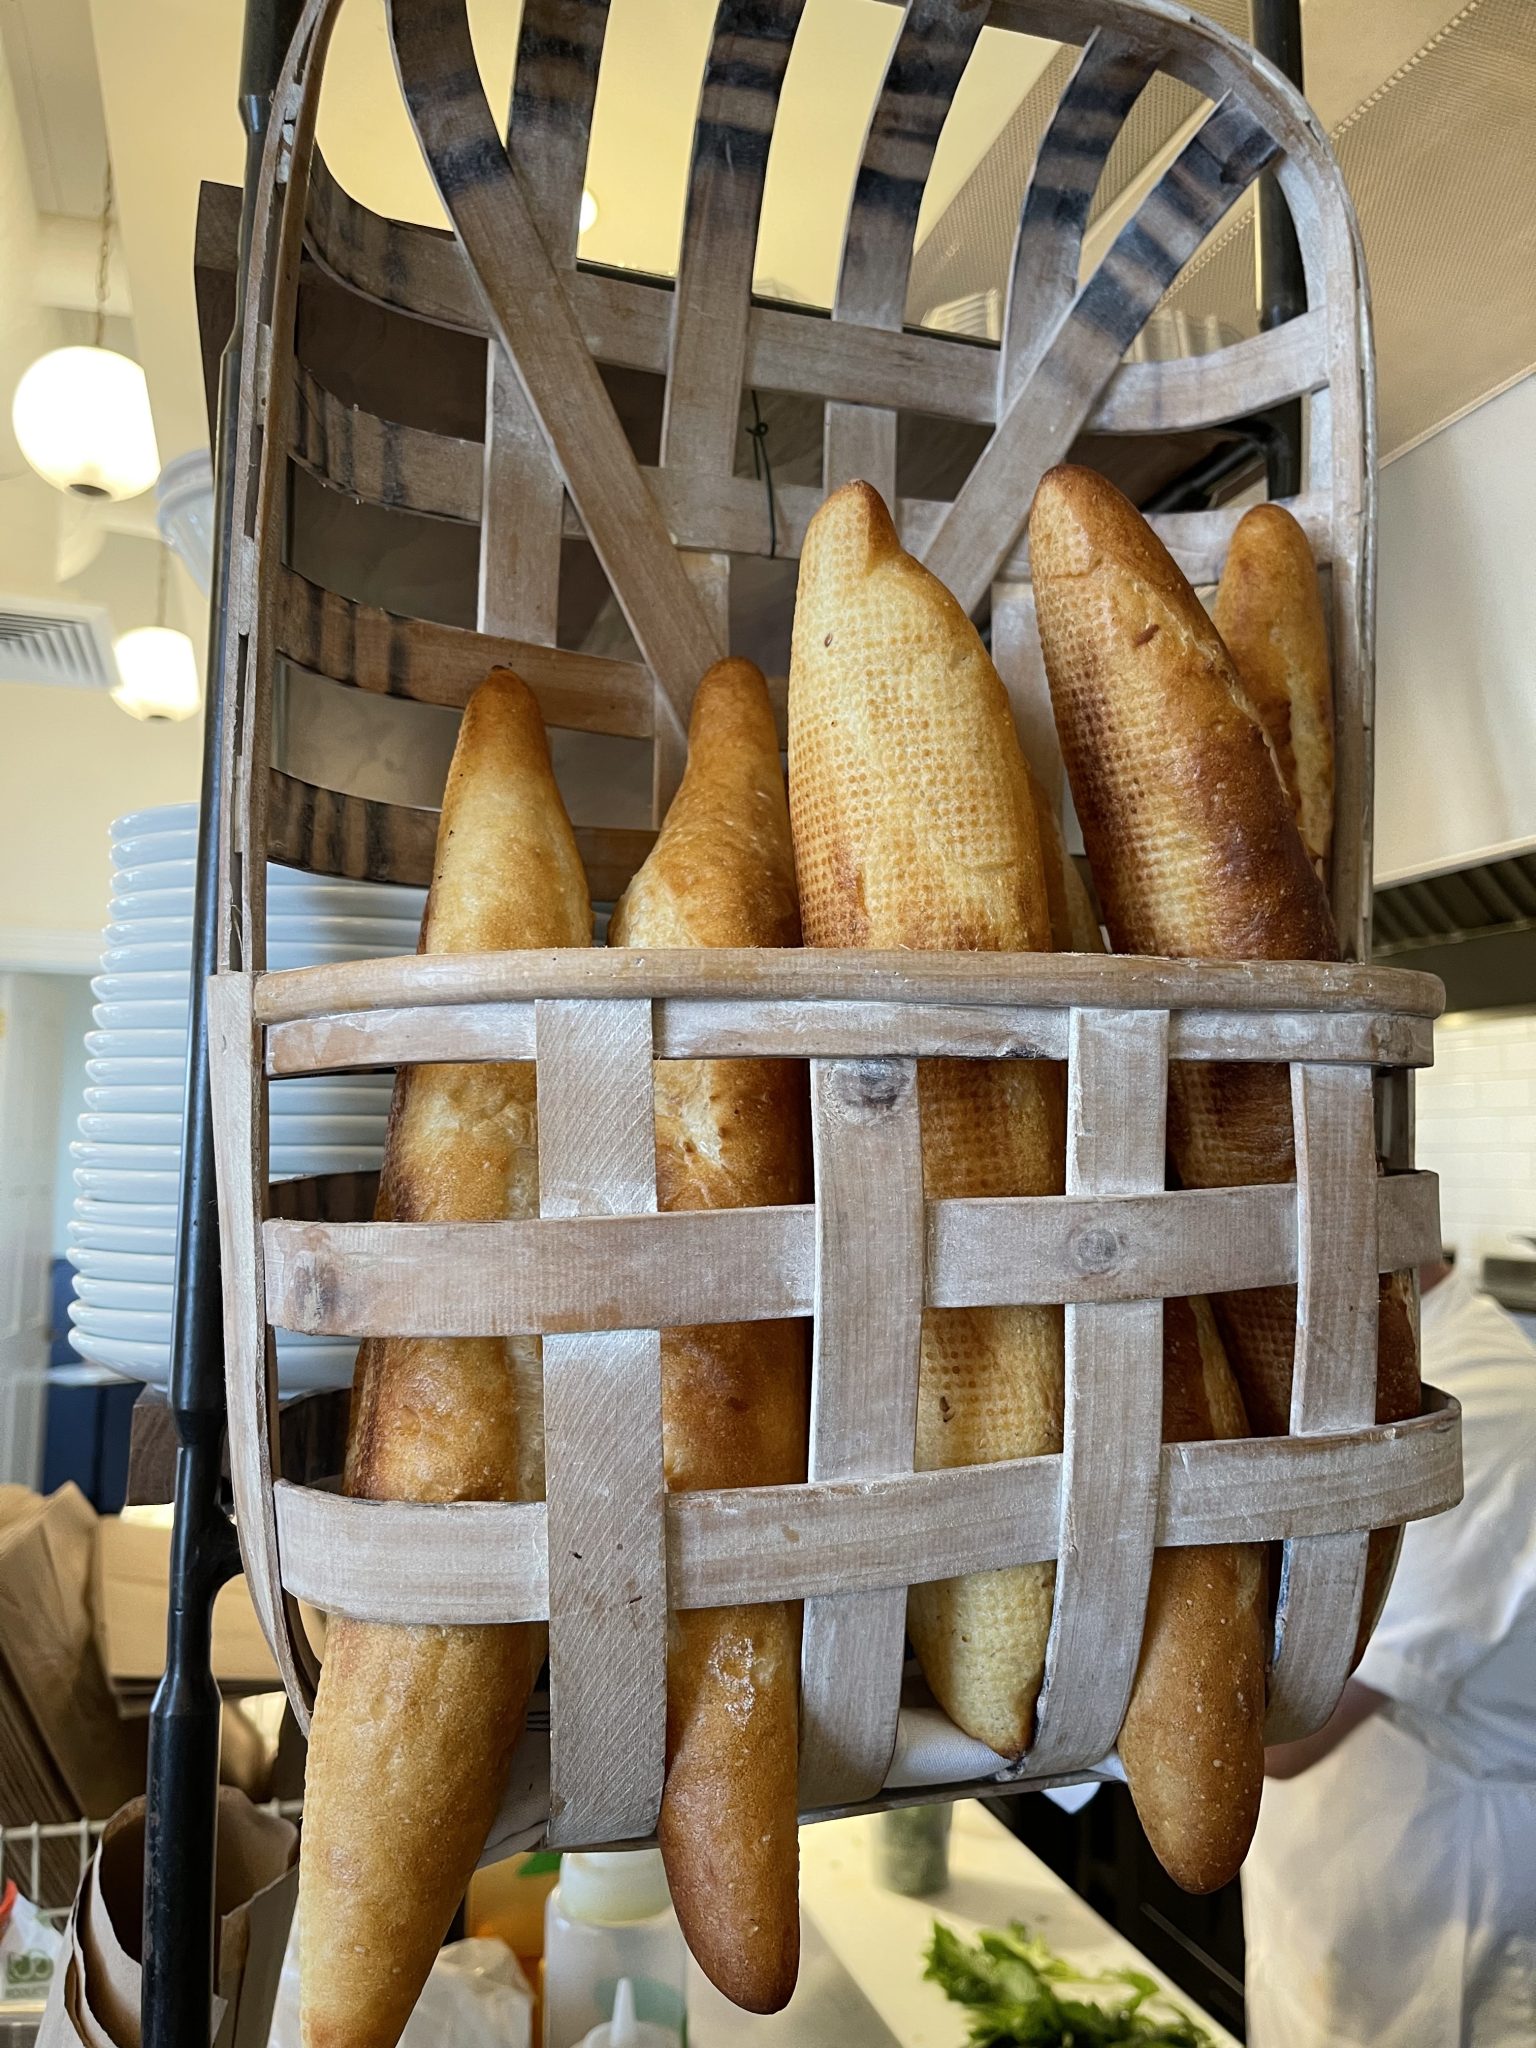 Baguettes in a basket.